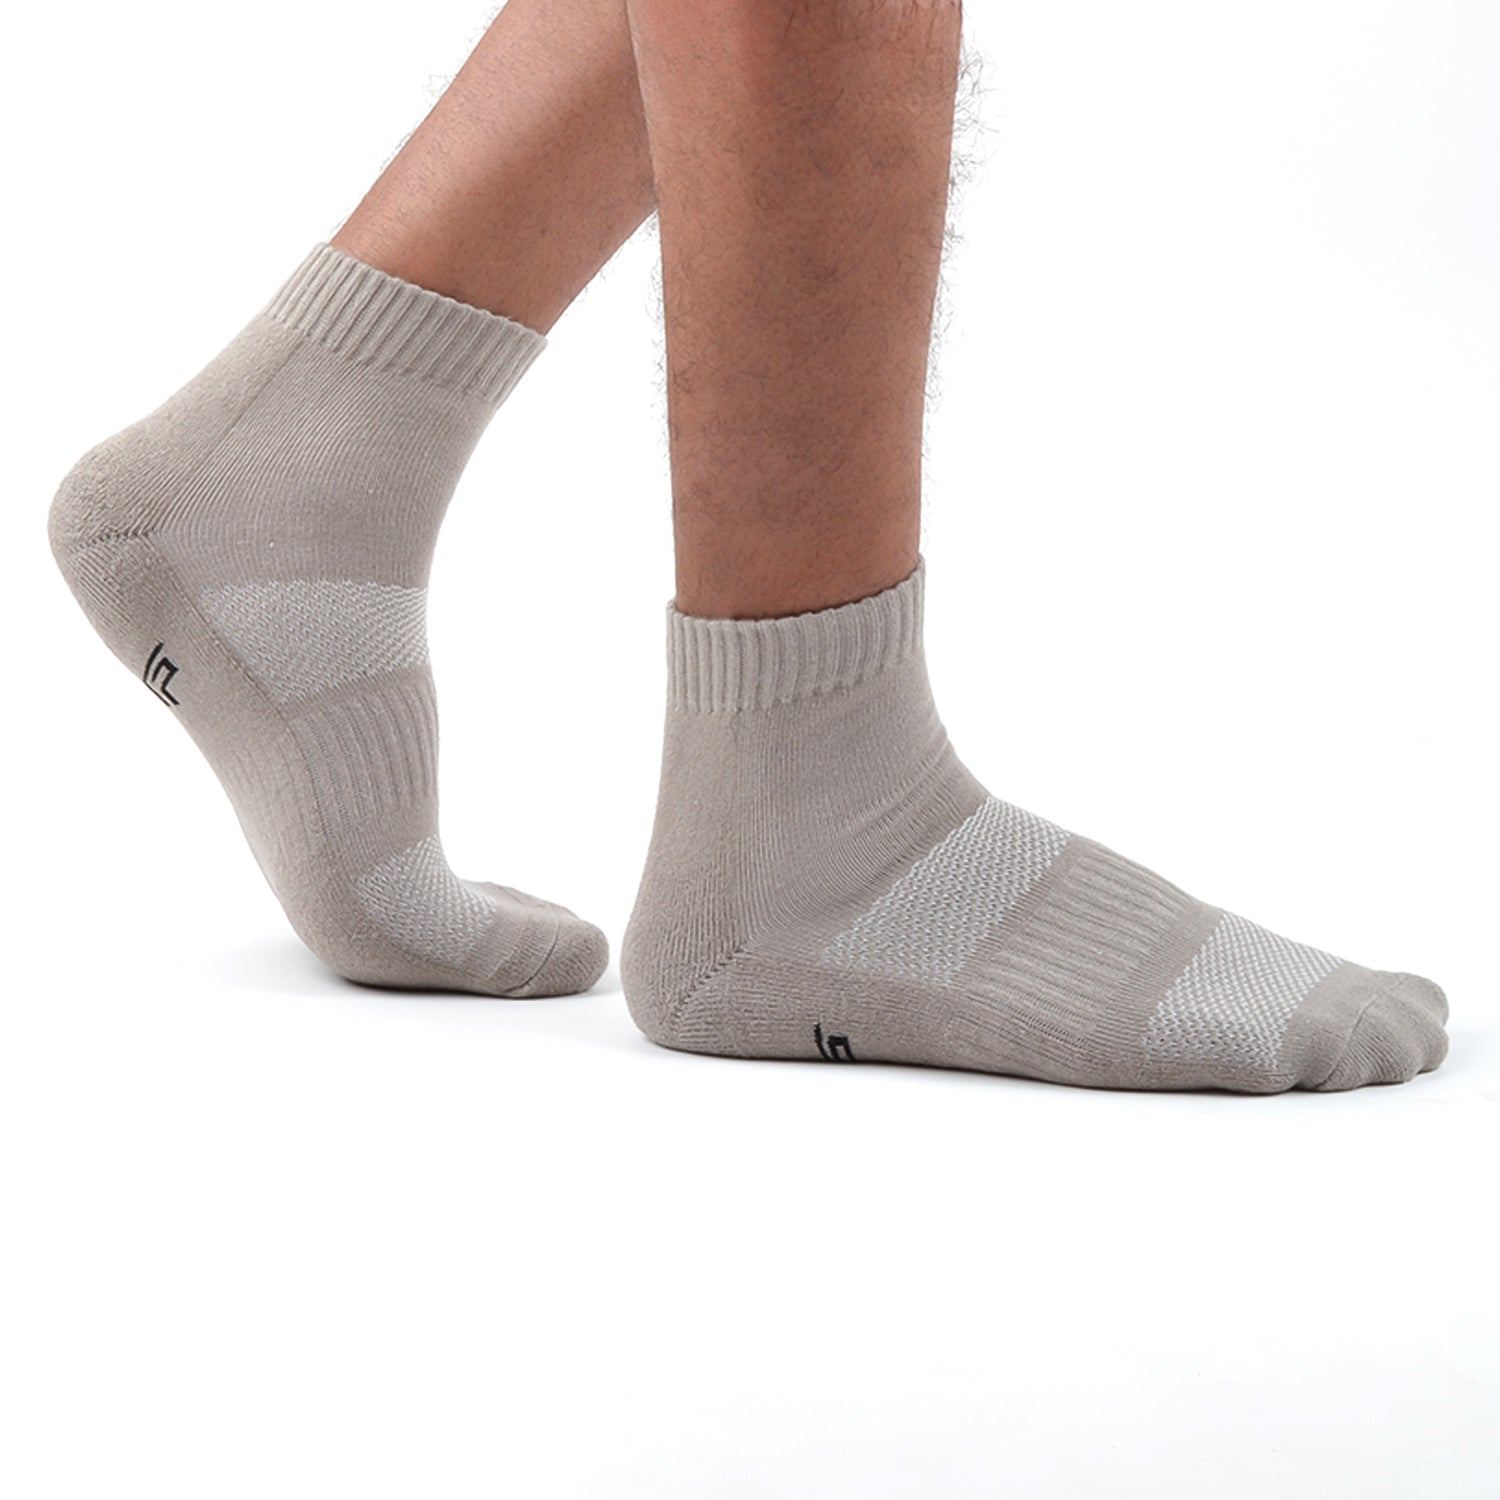 FOOTPRINTS Unisex Solid Cotton Ankle Terry -Length Socks -Pack Of 1 |GREY|